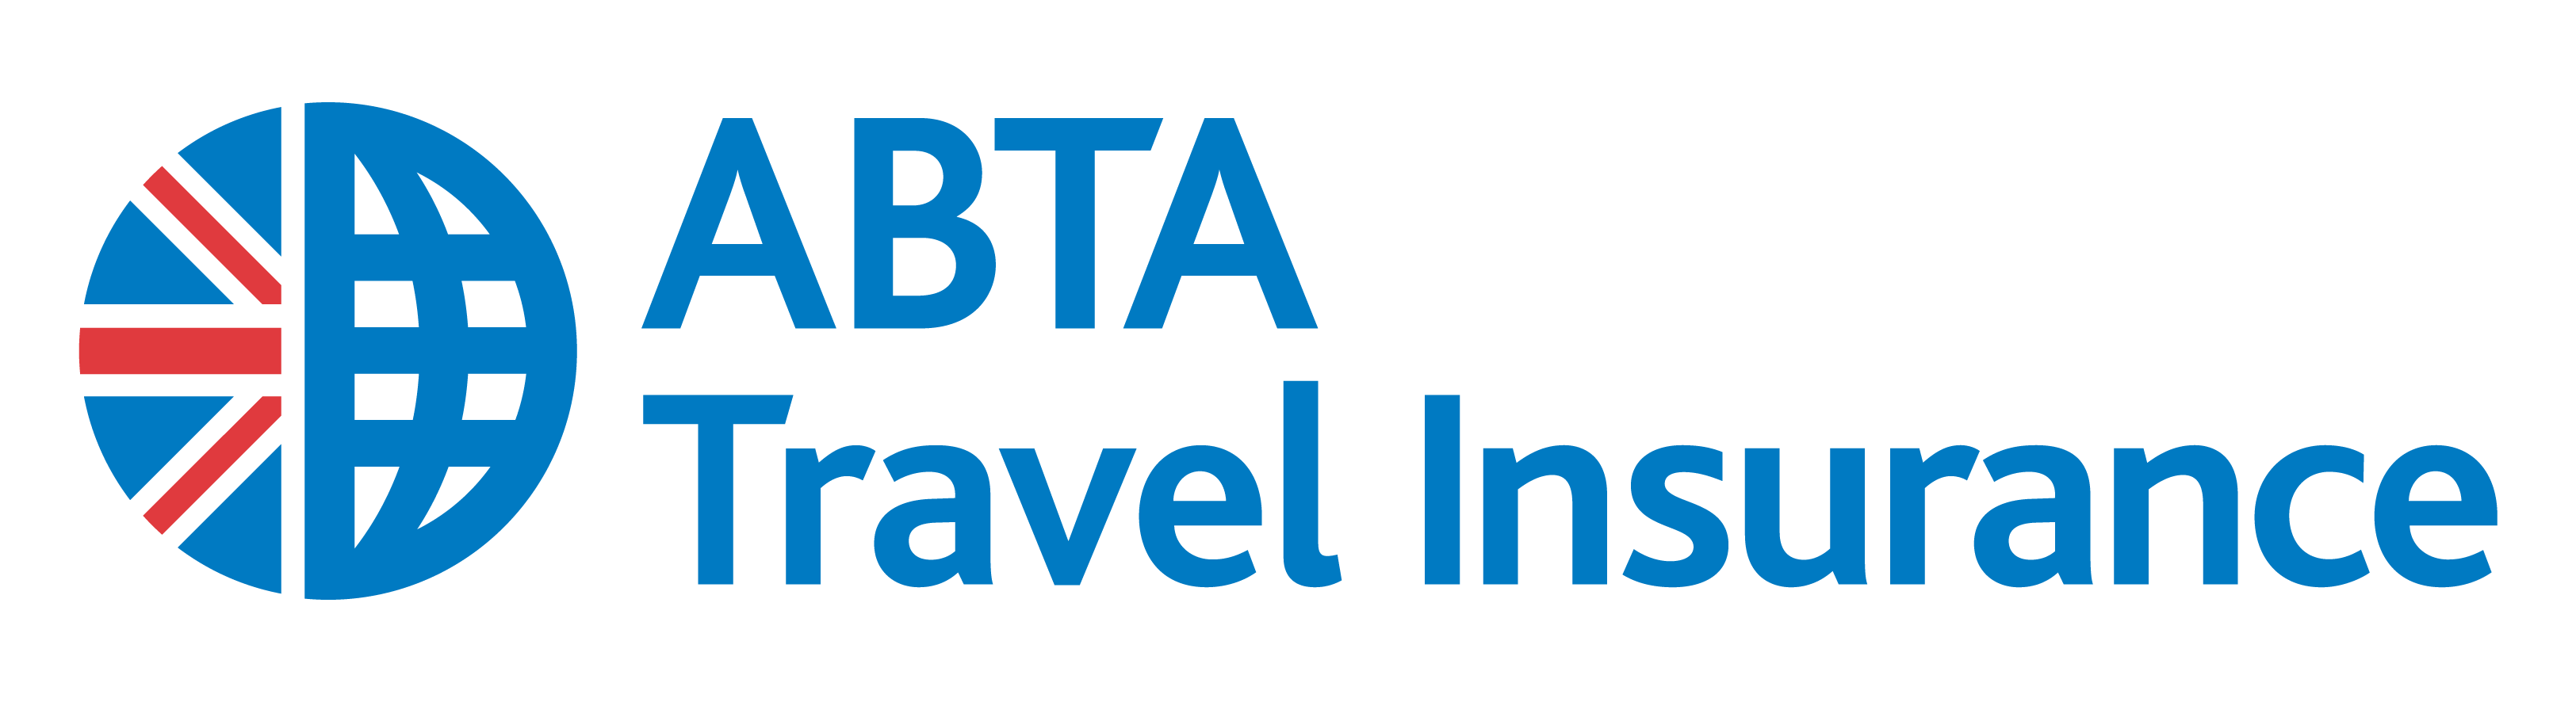 abta travel insurance contact number